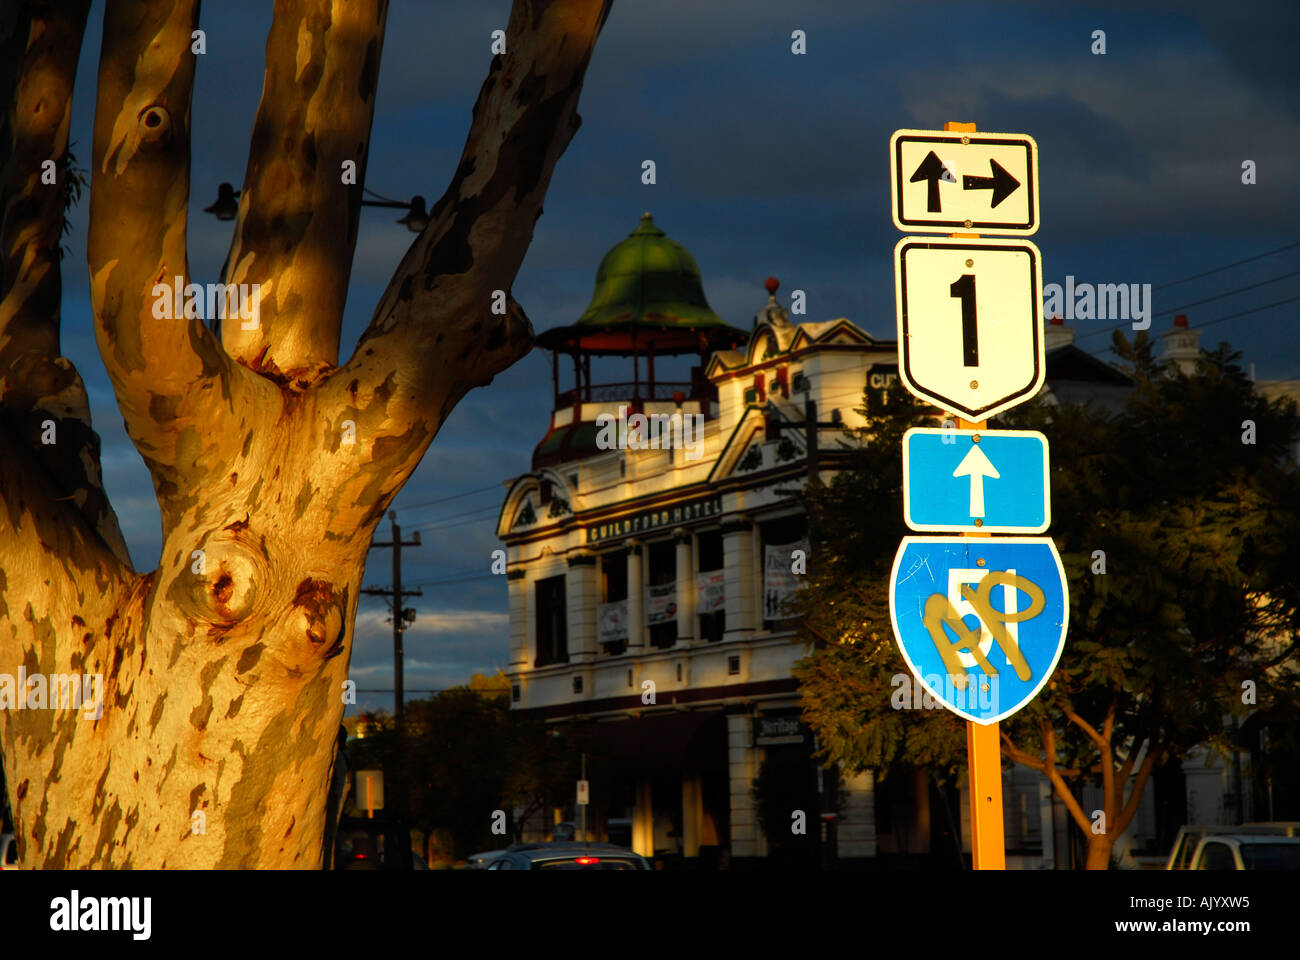 last light of sunset shines on highway street sign, sugar gum and Guildford hotel in background. Guildford, Western Australia Stock Photo